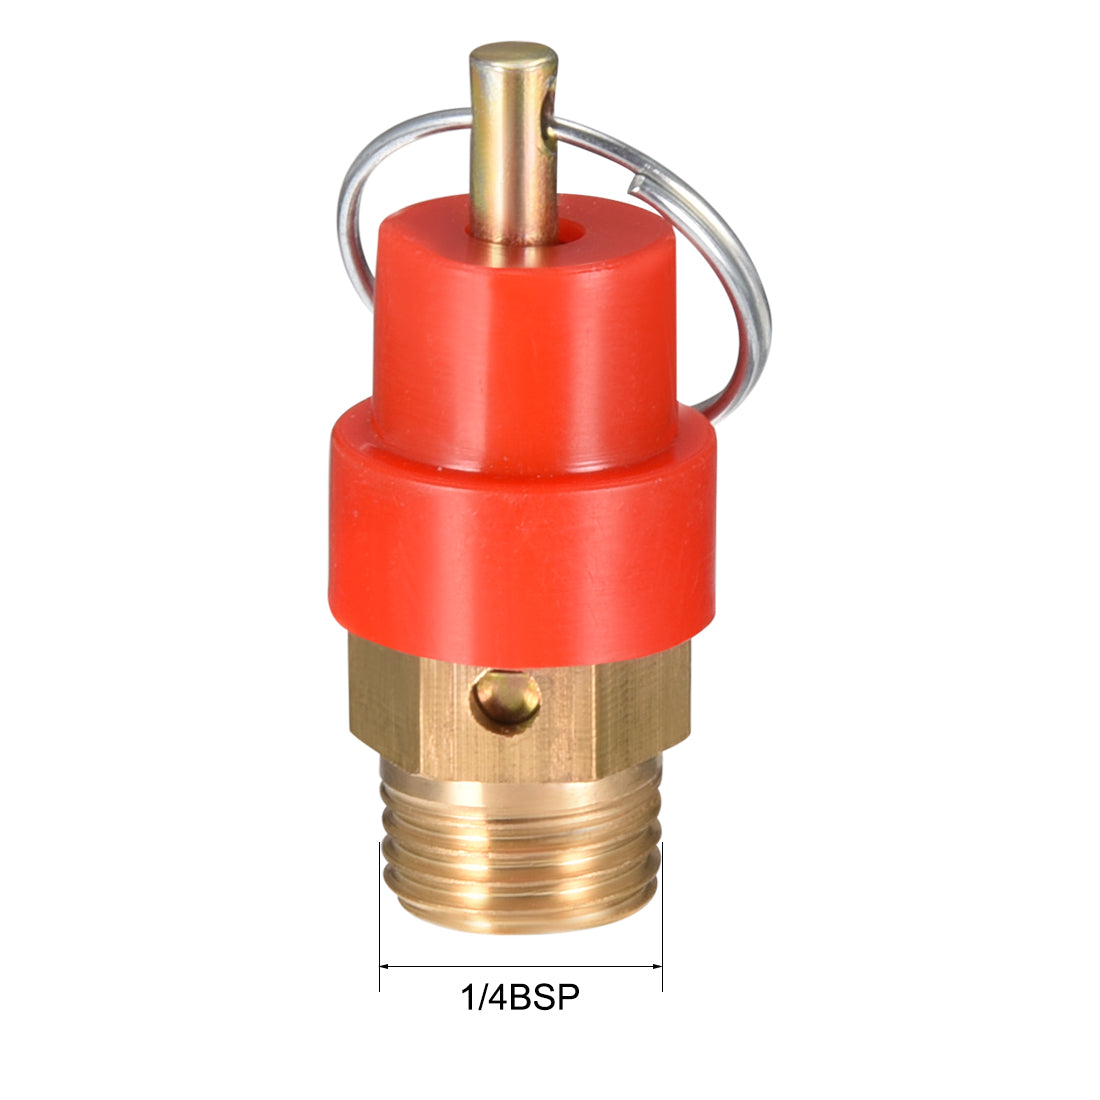 uxcell Uxcell 1/4 BSP Thread Pressure Relief Valve for Air Compressor 0.8Mpa Red Gold Tone w Split Ring 2 pcs